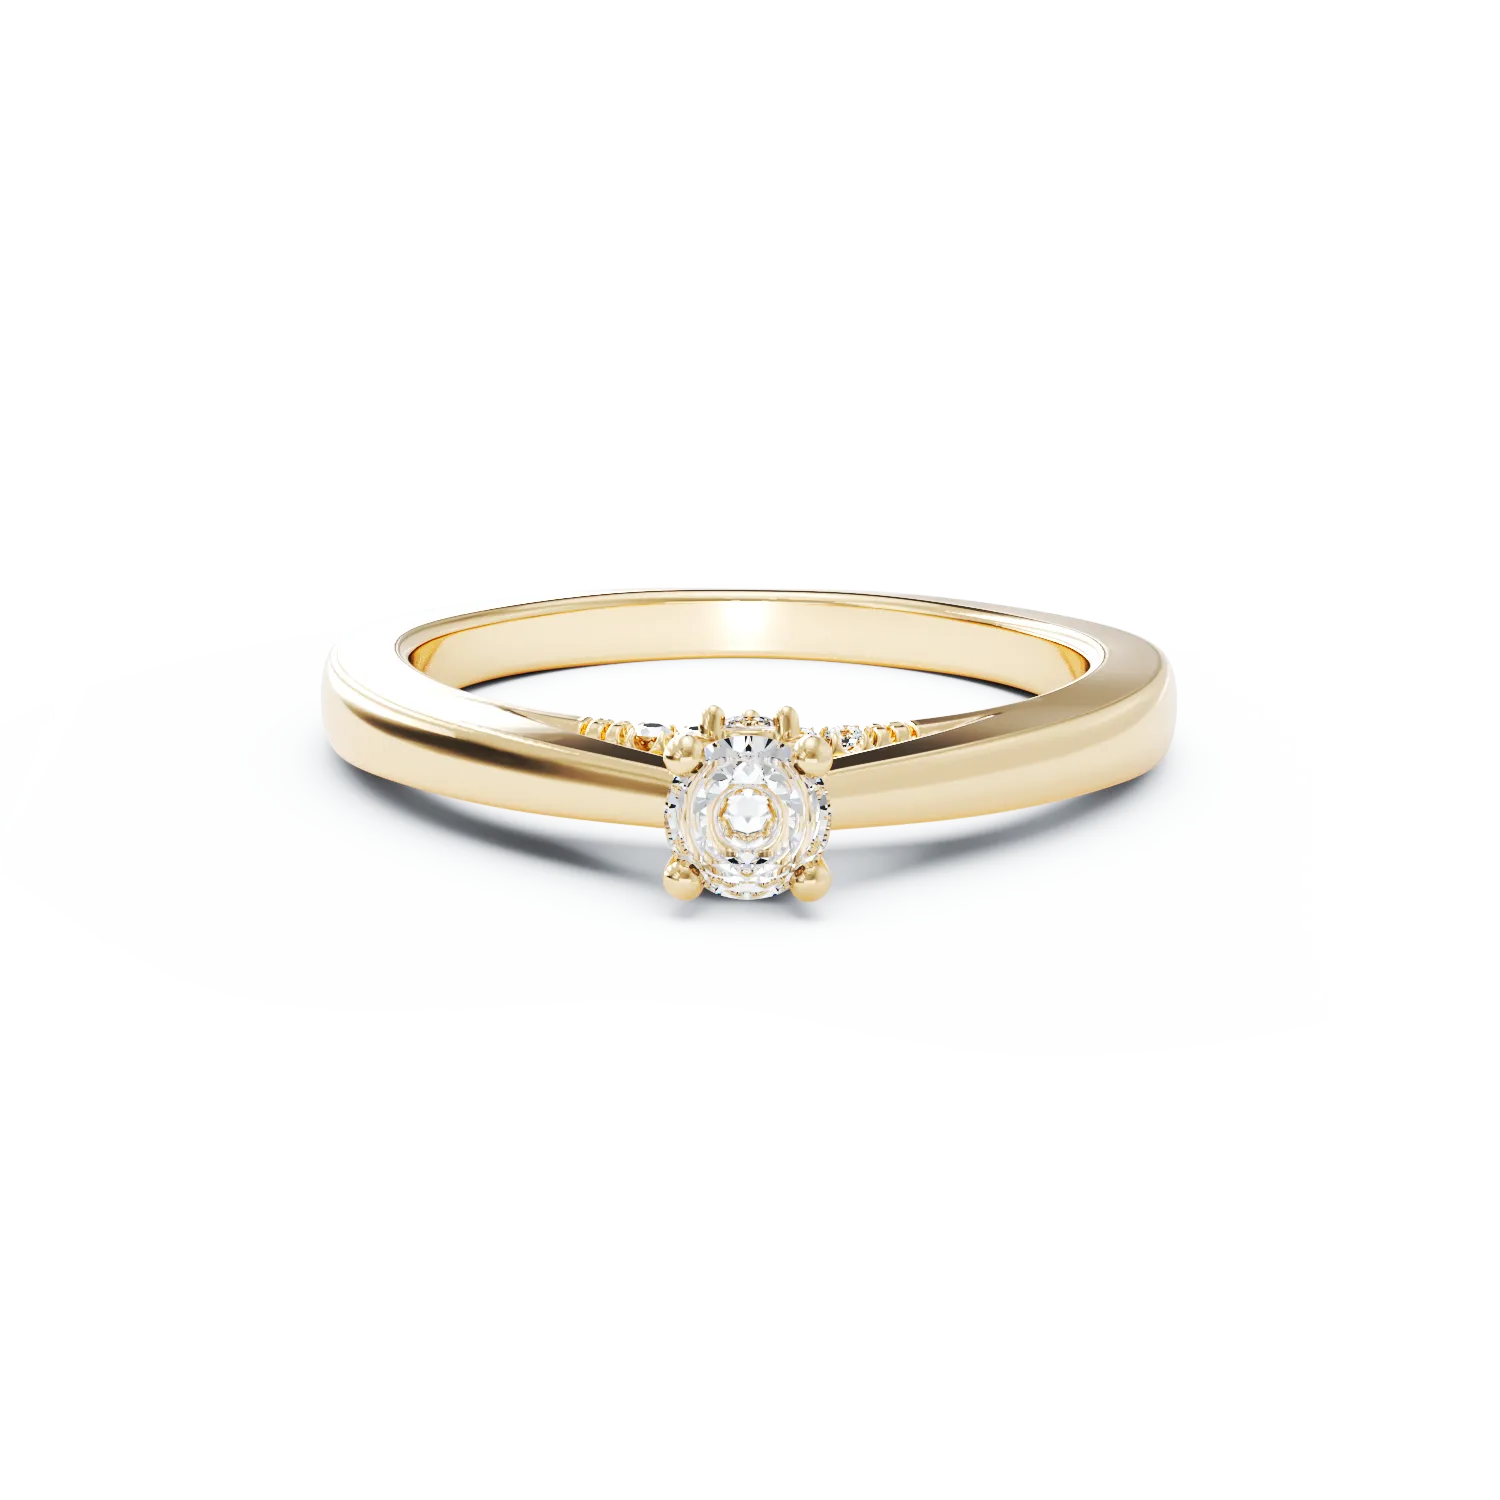 Yellow gold engagement ring with 0.1ct diamond and 0.06ct diamonds